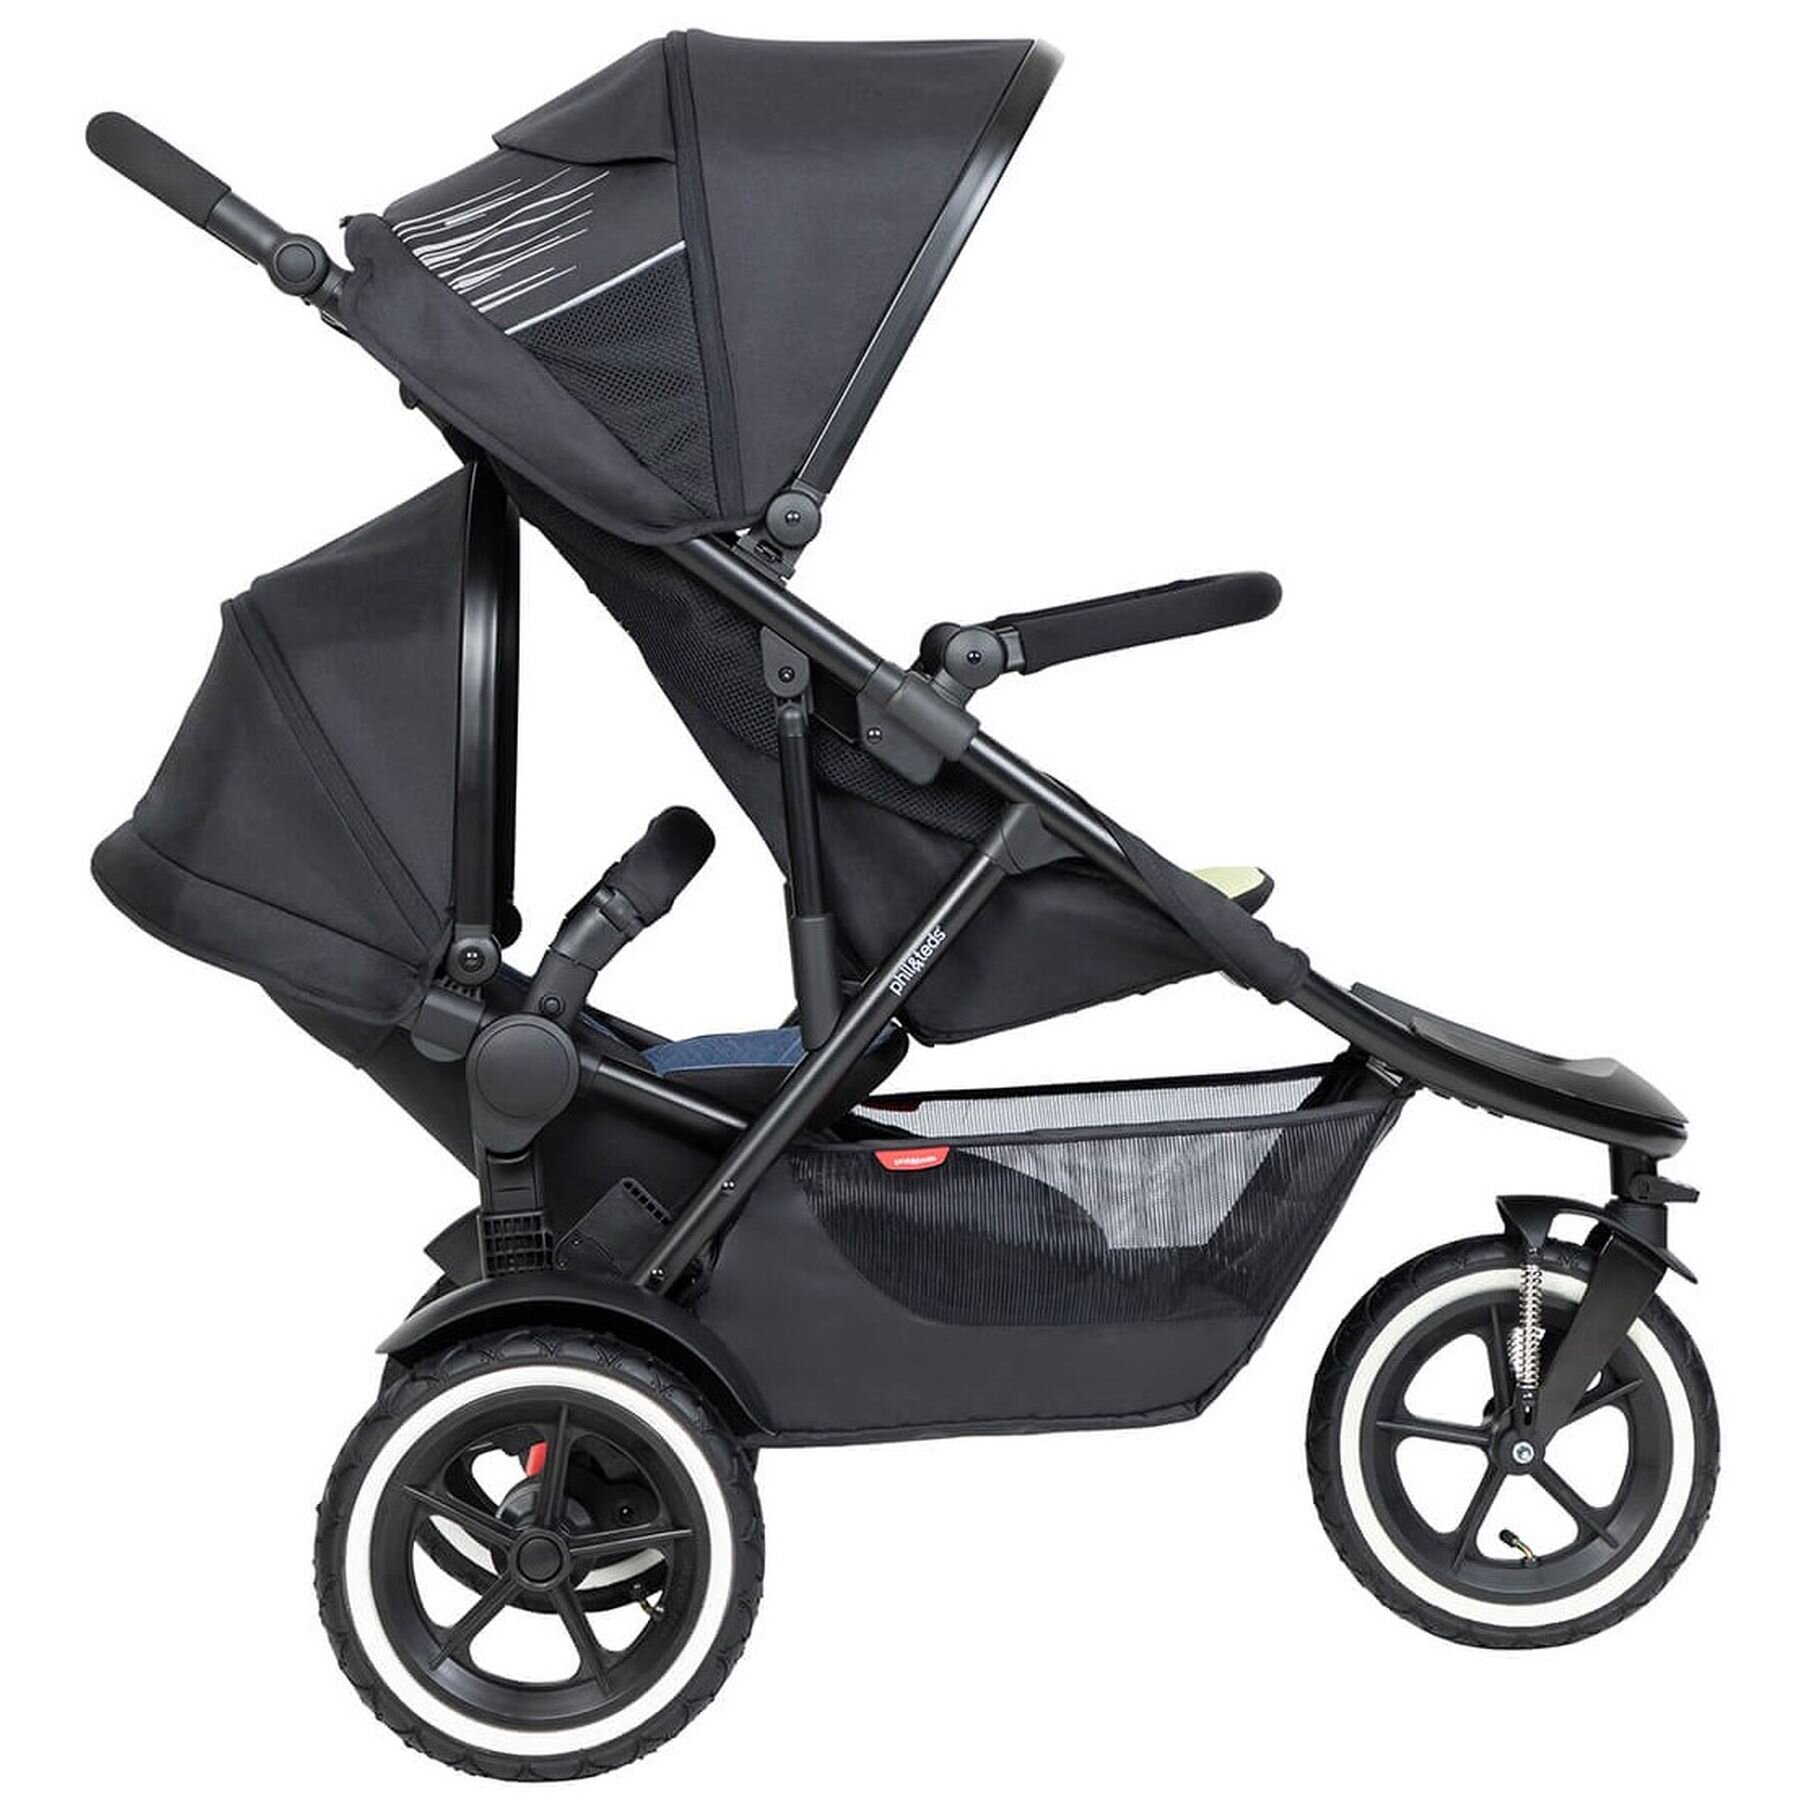 age for stroller without car seat